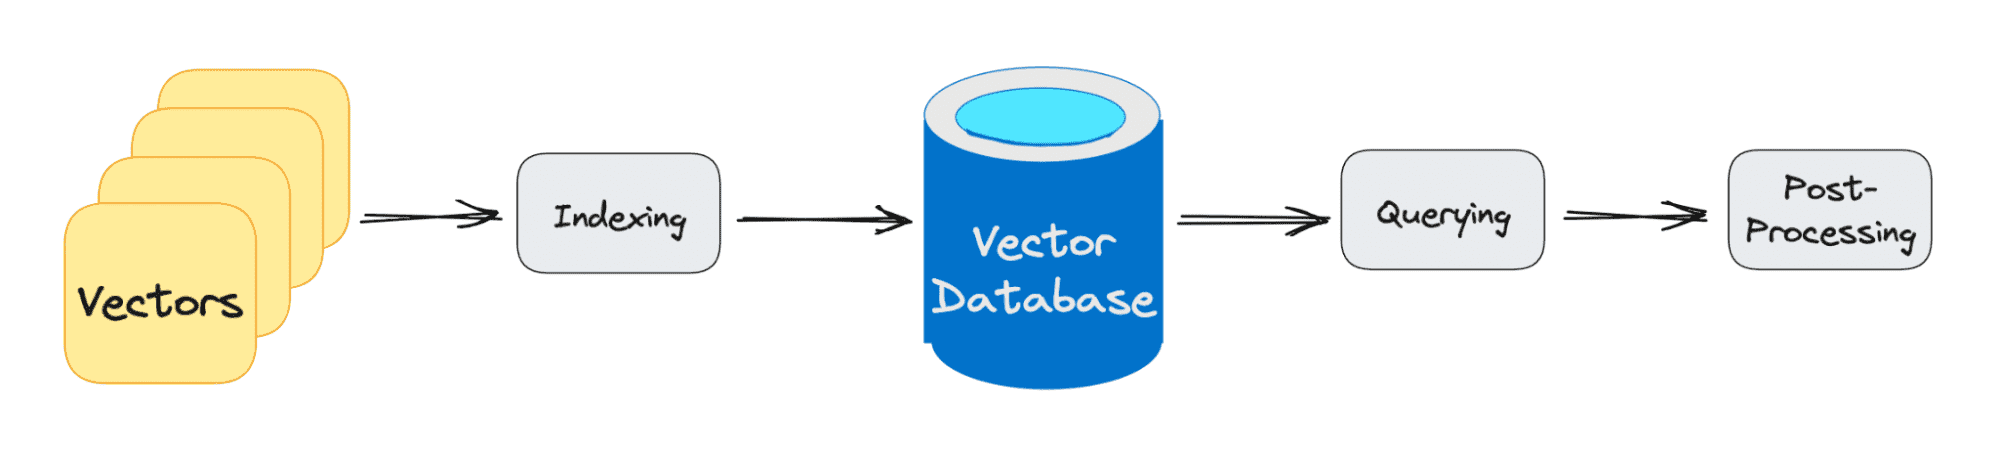 What are Vector Databases and Why Are They Important for LLMs?